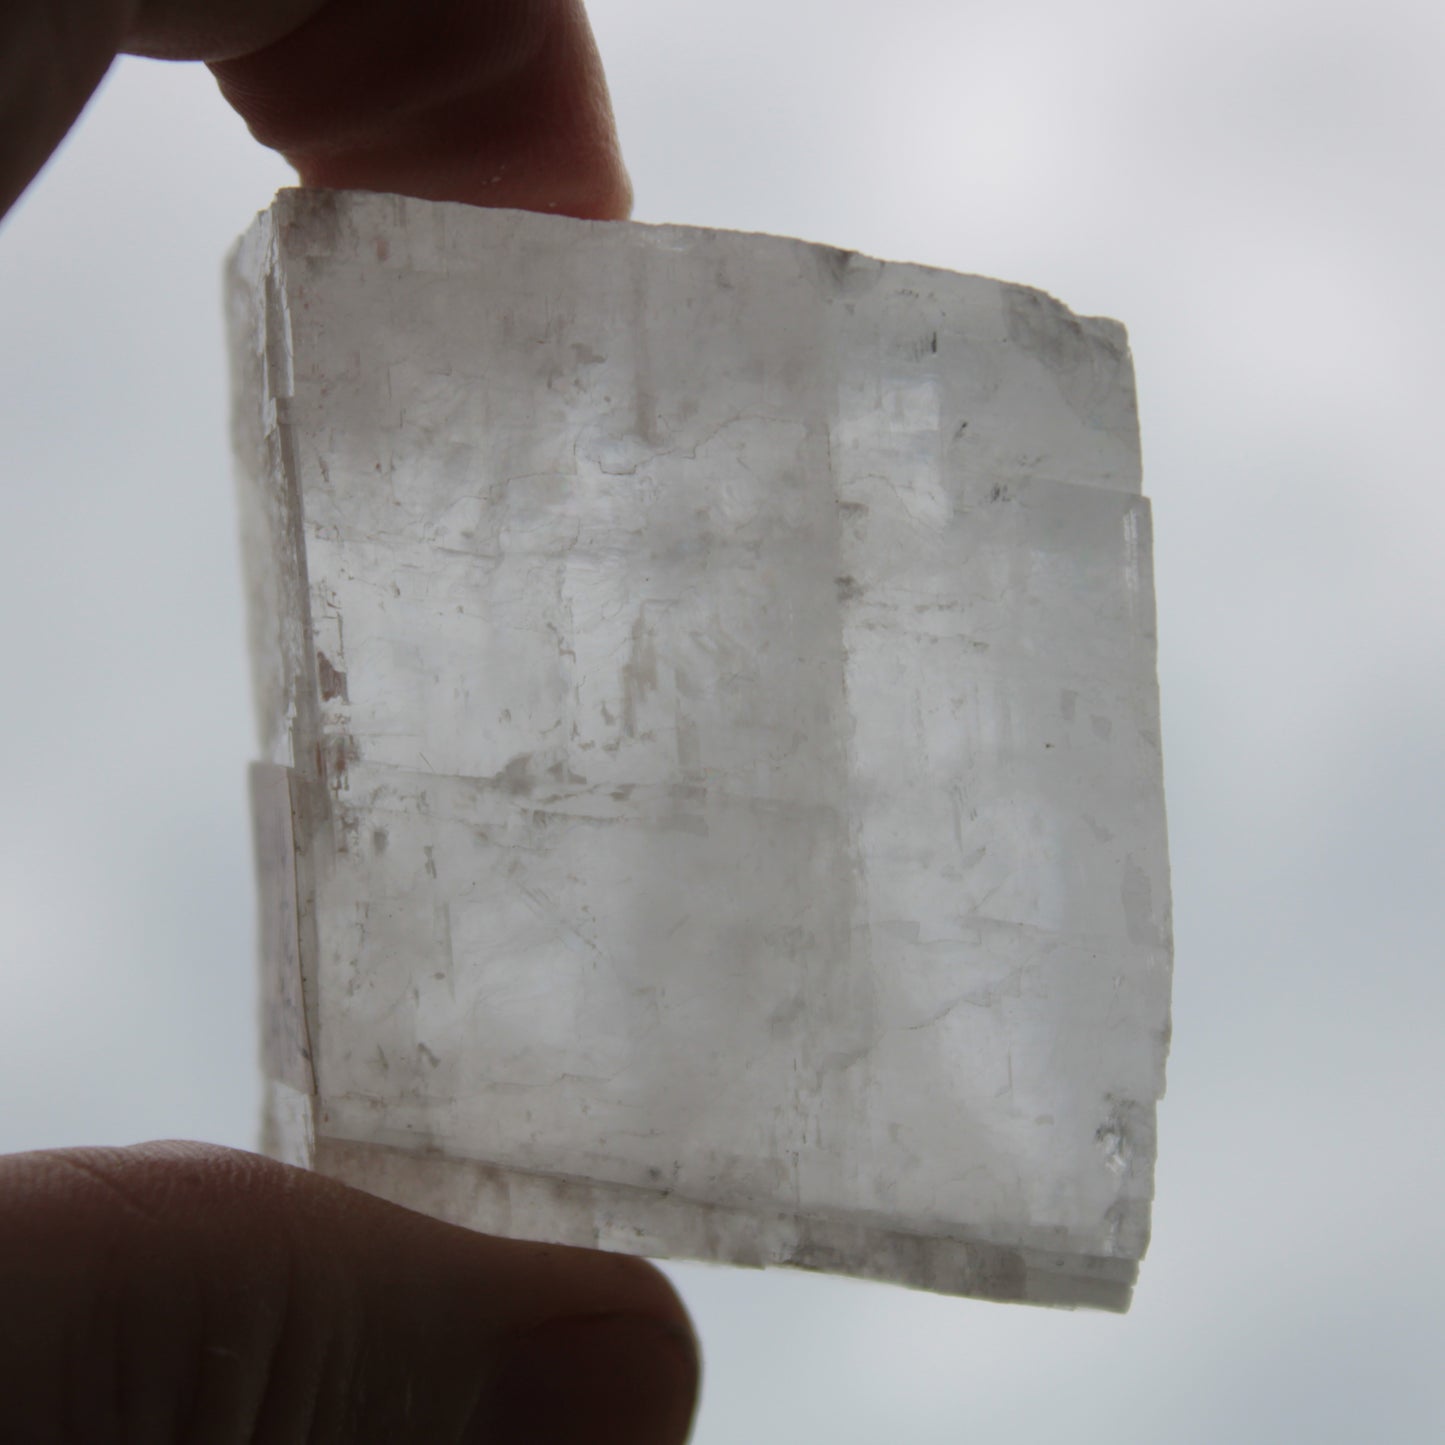 White Calcite Spar from China 124g